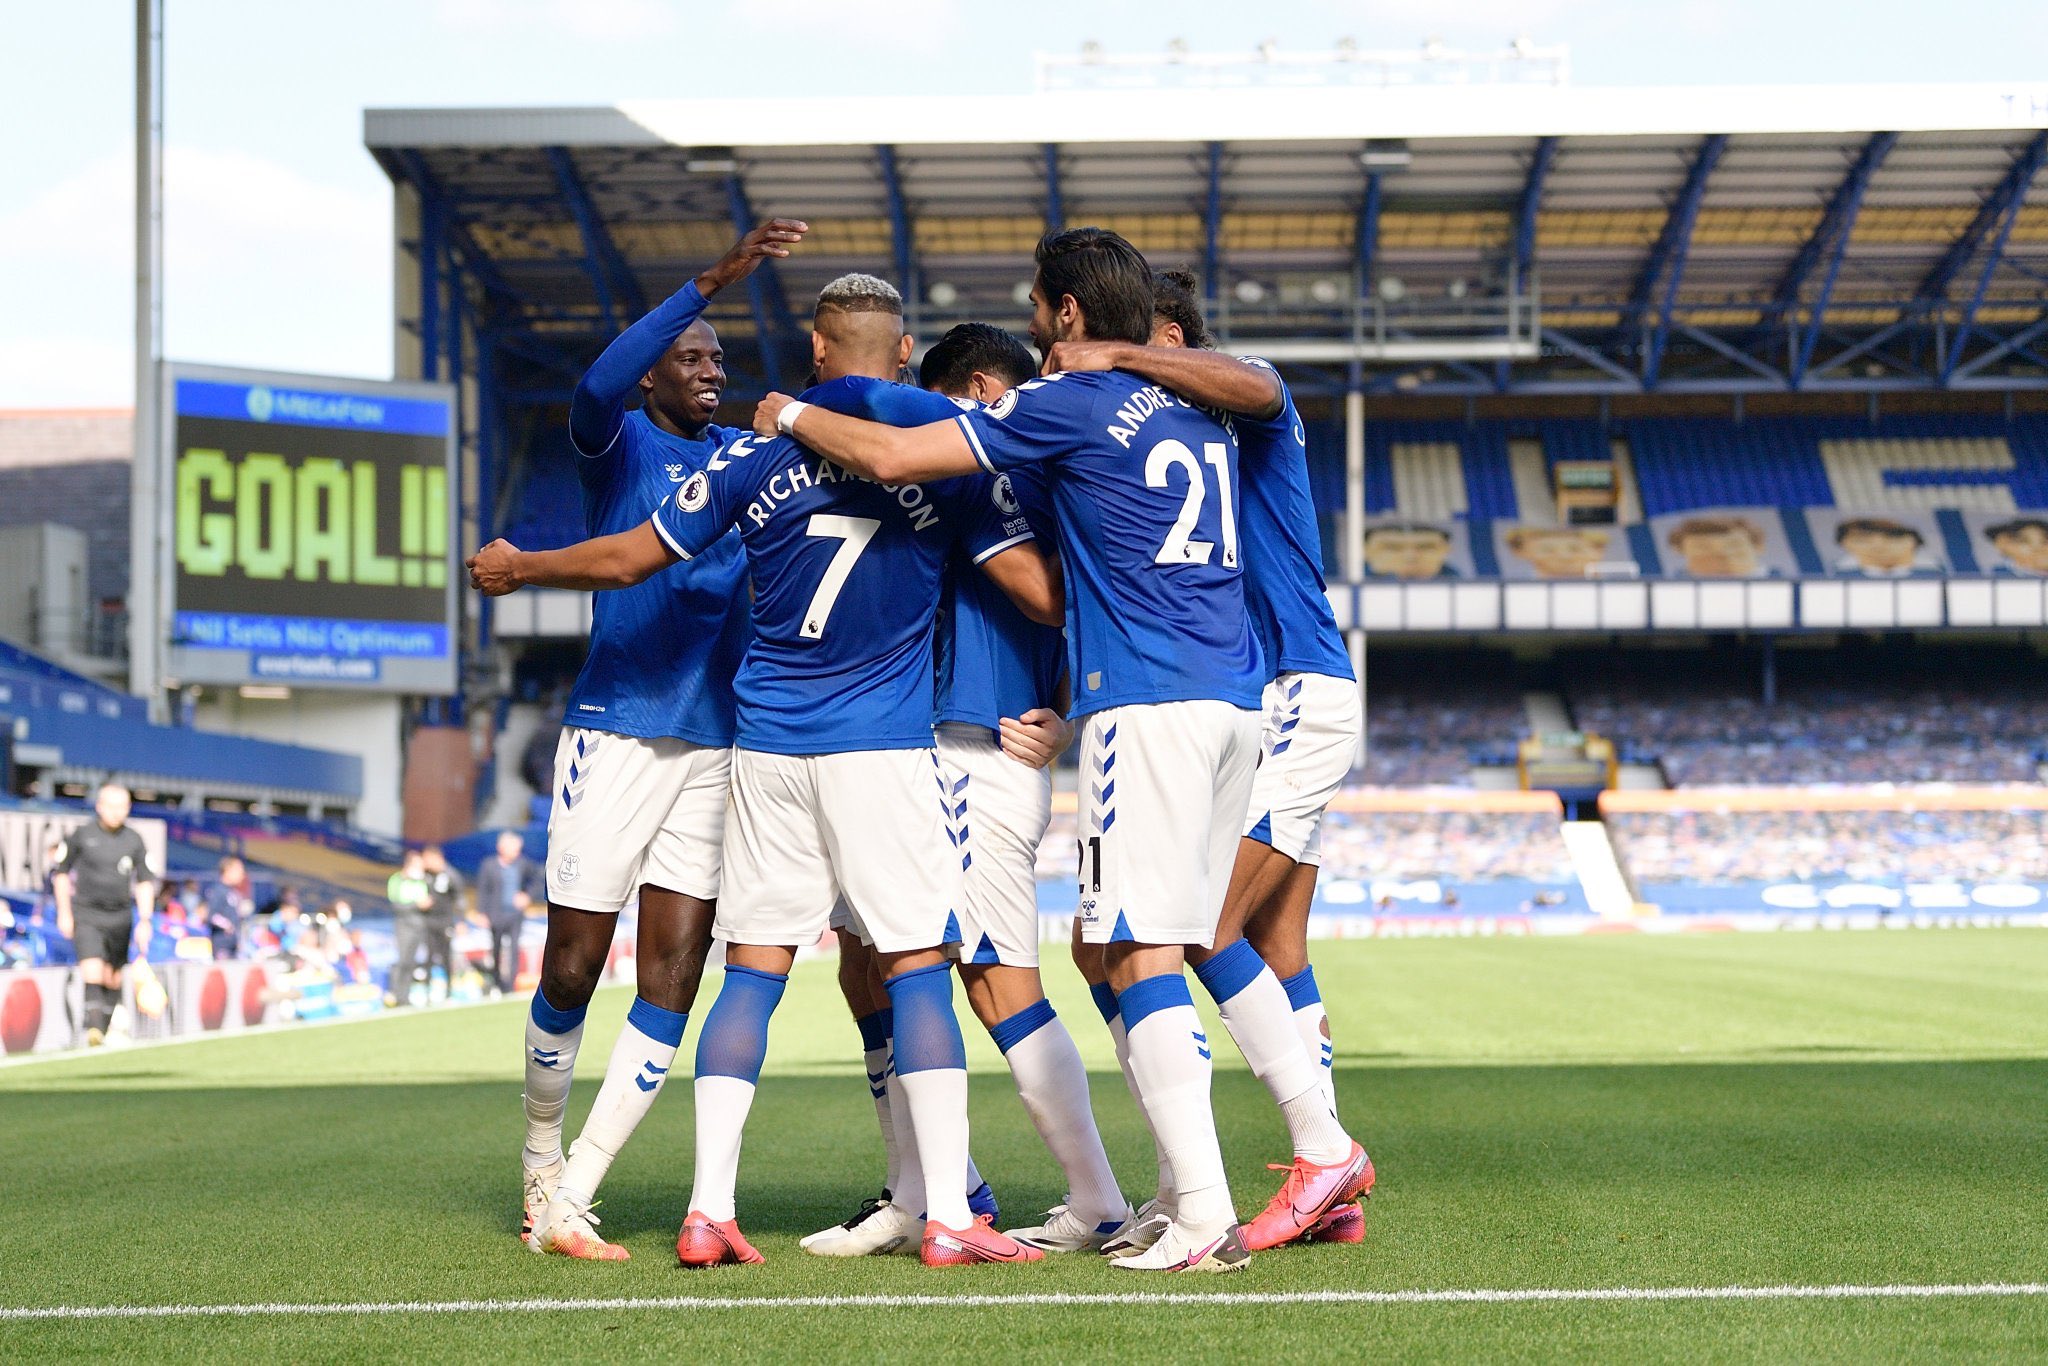 Everton have brought the fun back to Goodison and now they need to keep the faith in Don Carlo